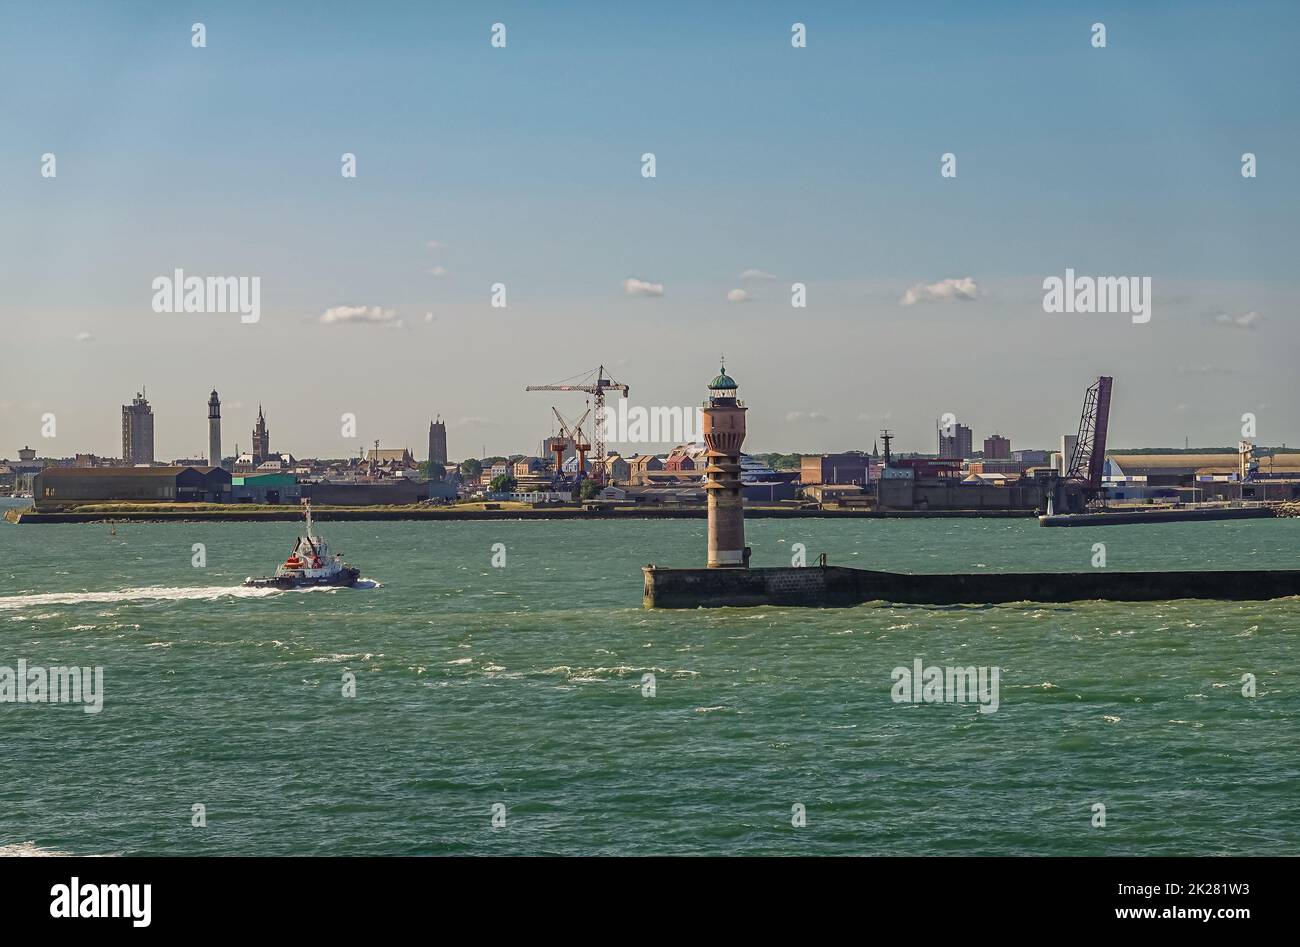 Europe, France, Dunkerque - July 9, 2022: Port scenery. Feu de Saint Pol light tower on its pier at entrance with city skyline on horizon. Belfry towe Stock Photo